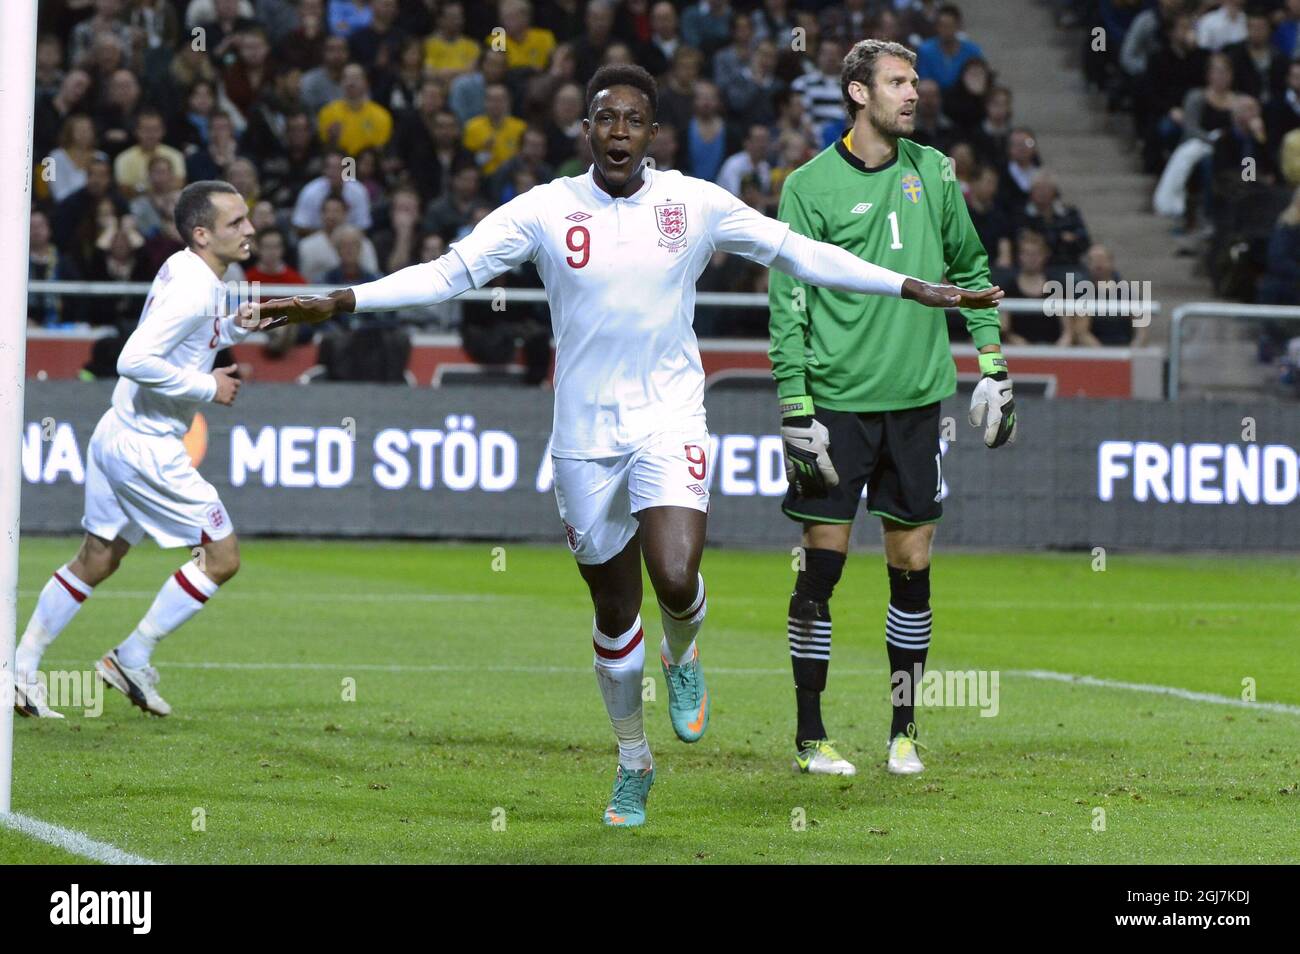 England's Daniel Welbeck celebrates after the 1-1 goal behind Sweden's goalkeeper Andreas Isaksson (right) during the friendly soccer match Sweden vs England at the new national soccer stadium 'Friends Arena' in Stockholm, Sweden Stock Photo